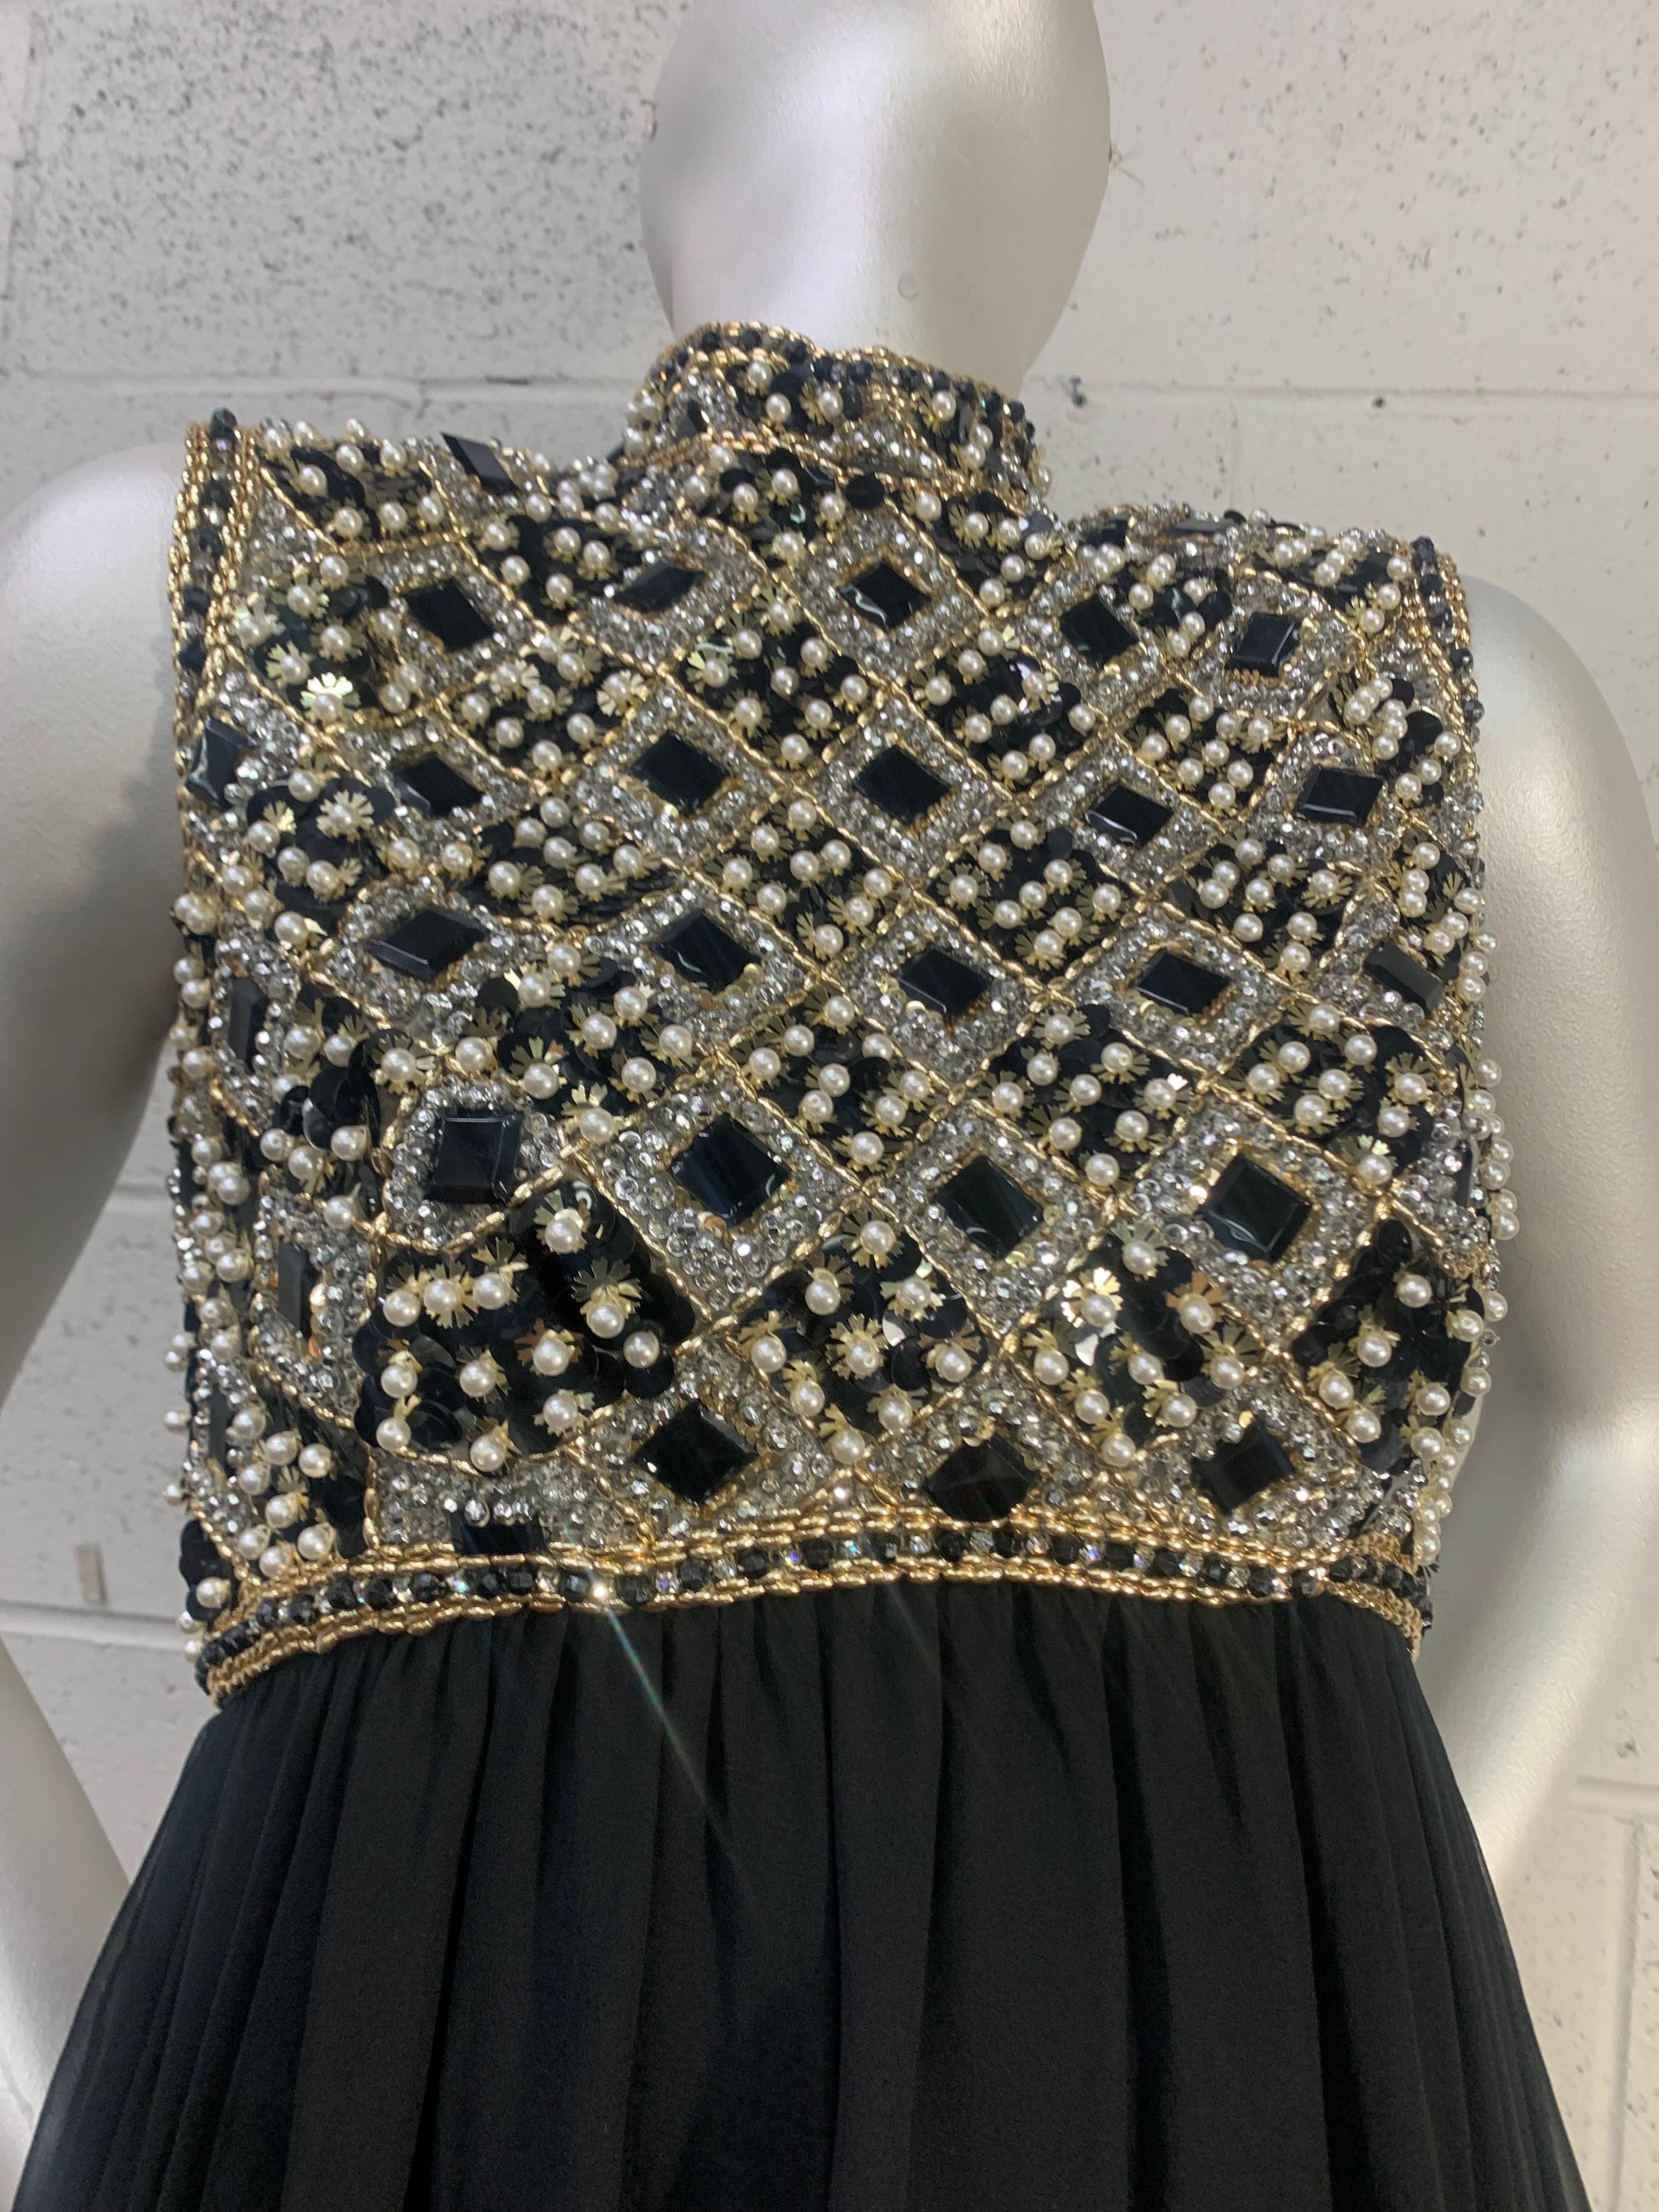 1960s Victoria Royale Ltd. Beaded Sequined Empire Mod Cocktail Dress in Black For Sale 9